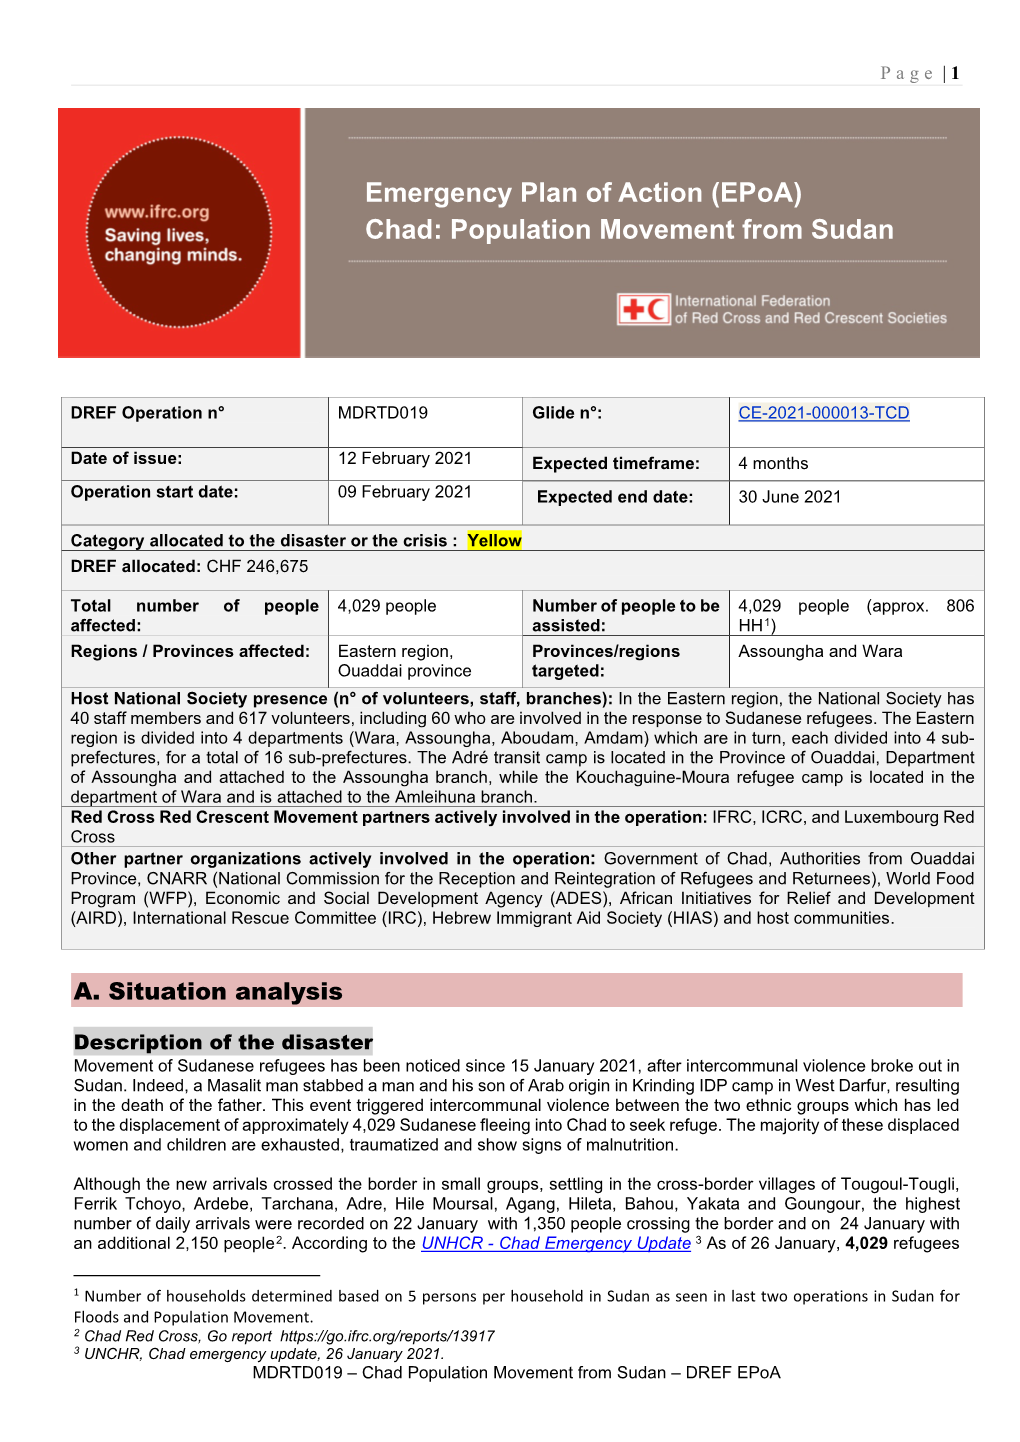 Emergency Plan of Action (Epoa) Chad: Population Movement from Sudan